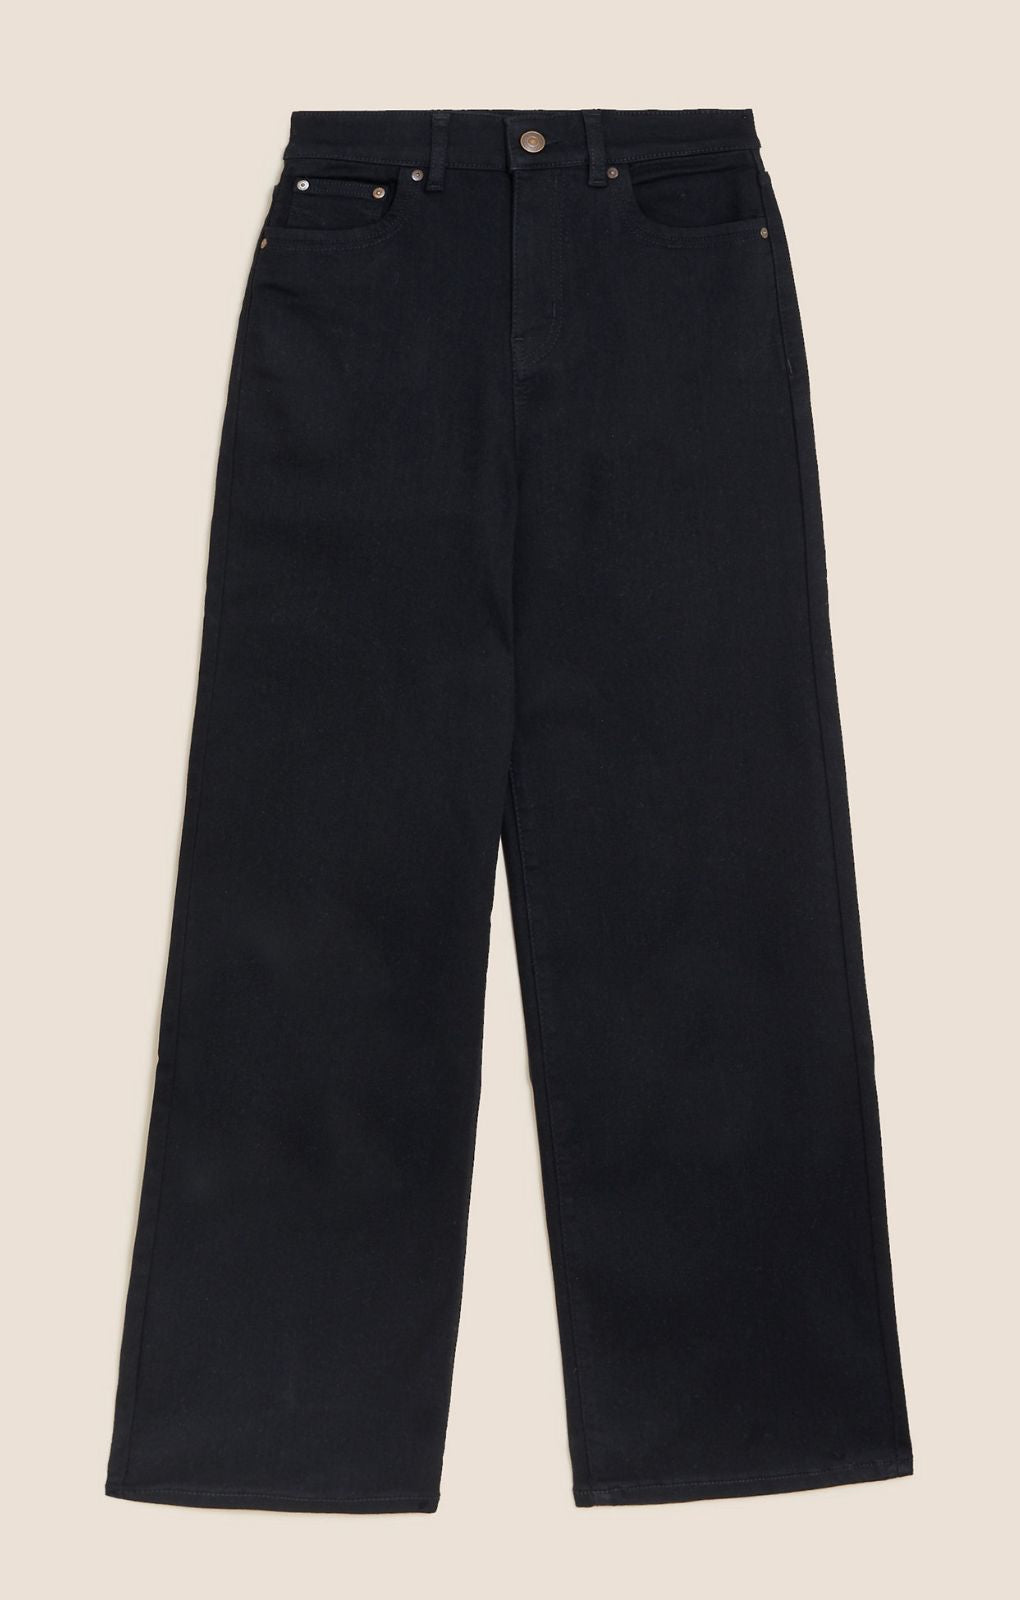 M&S Black Luxury High Waisted Wide Leg Jeans product image